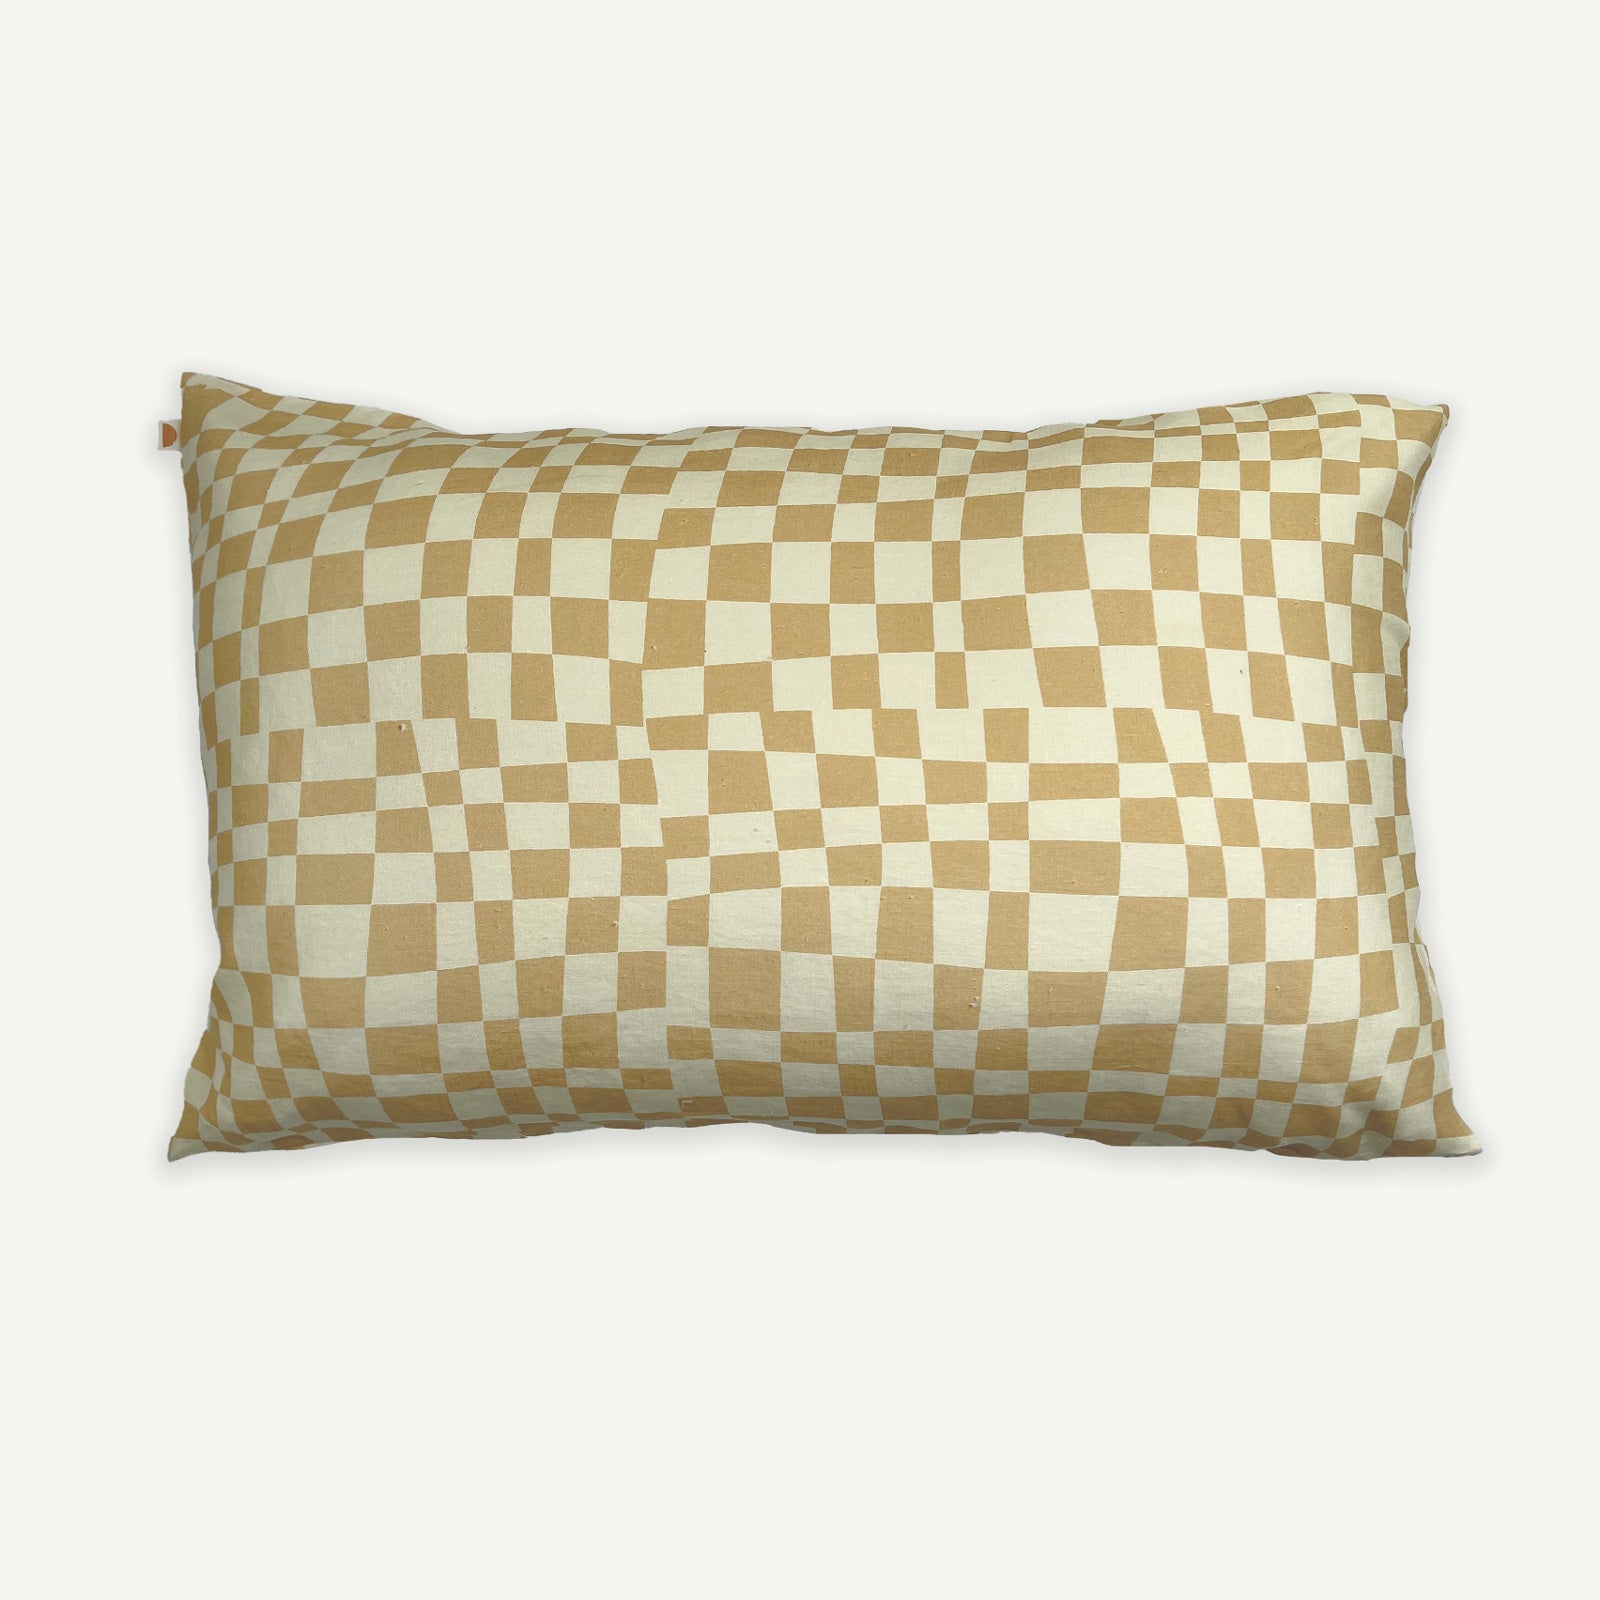 Checkers Quilt Cover and Pillowcase Set